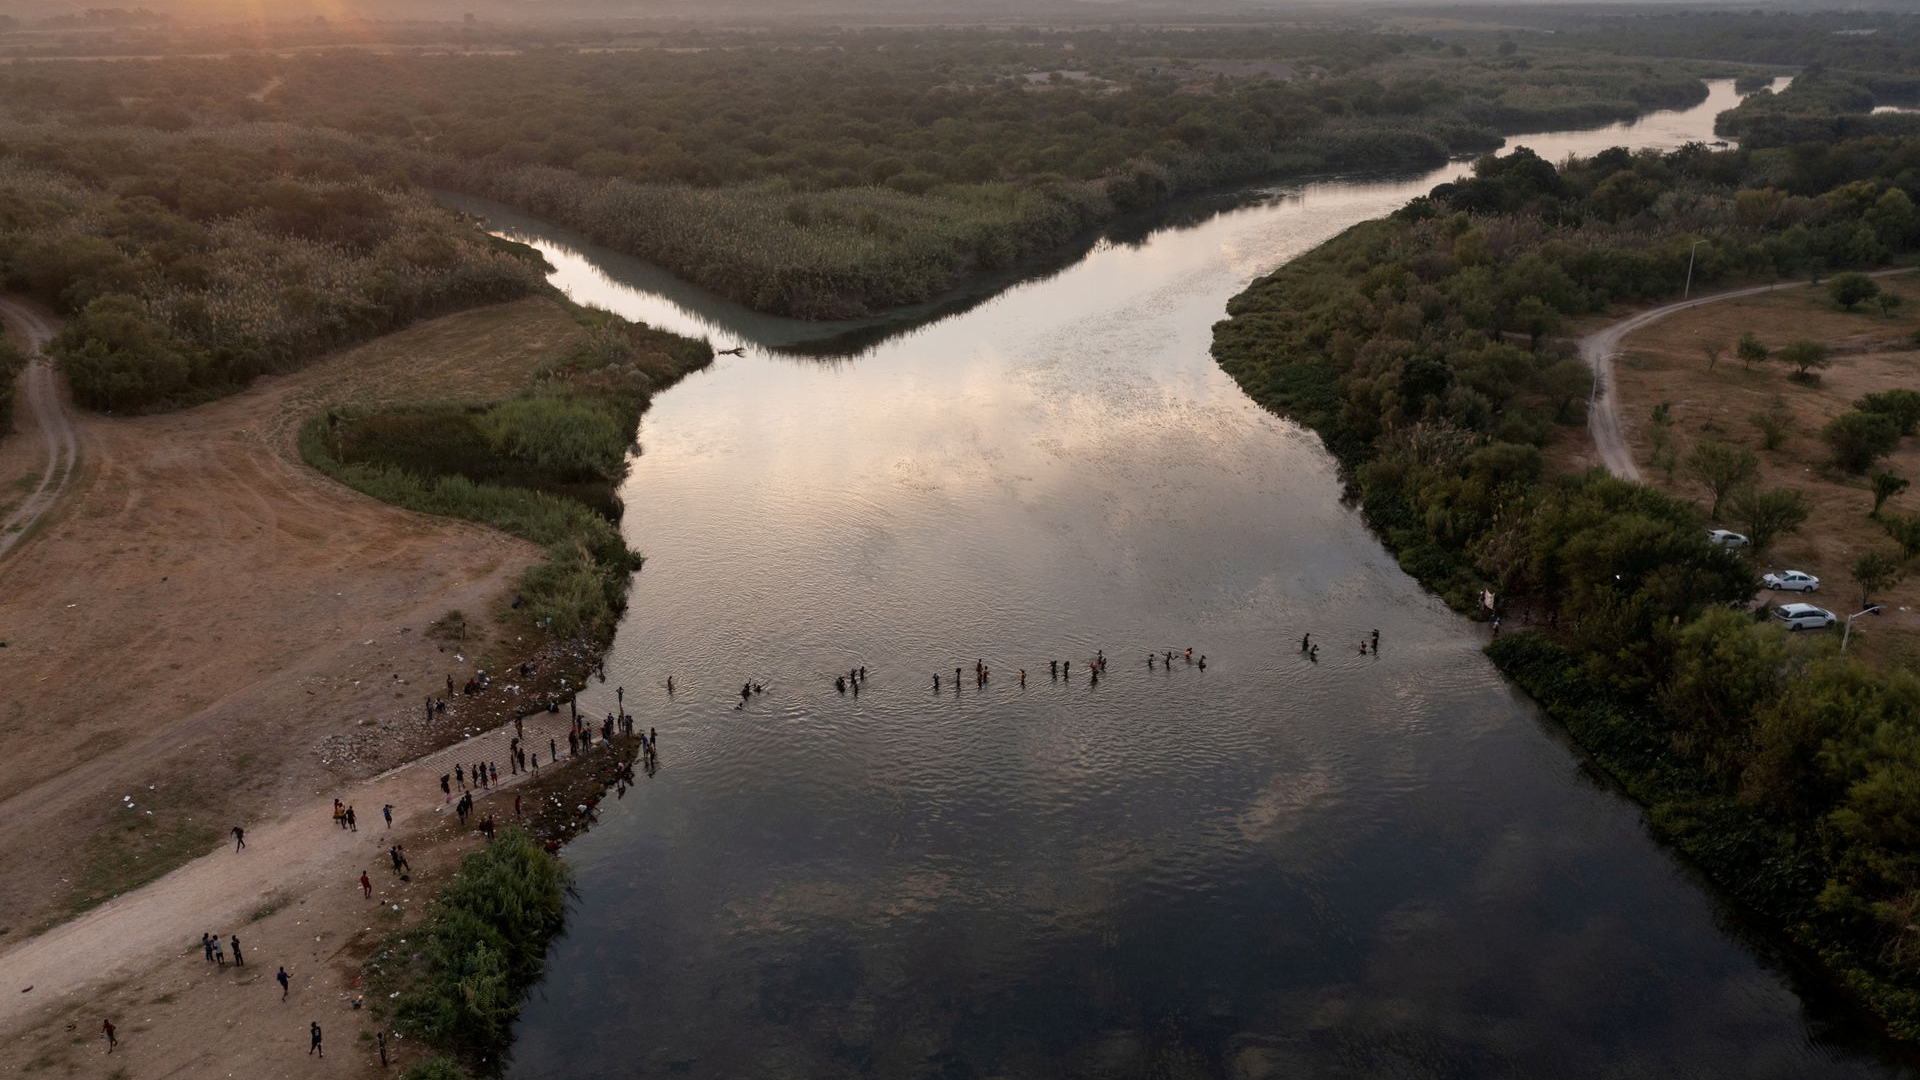 Migrants seeking refuge in the United States cross the Rio Grande River back into Ciudad Acuna, Mexico, from their camp in Del Rio, Texas, the U.S., September 21, 2021. /Reuters